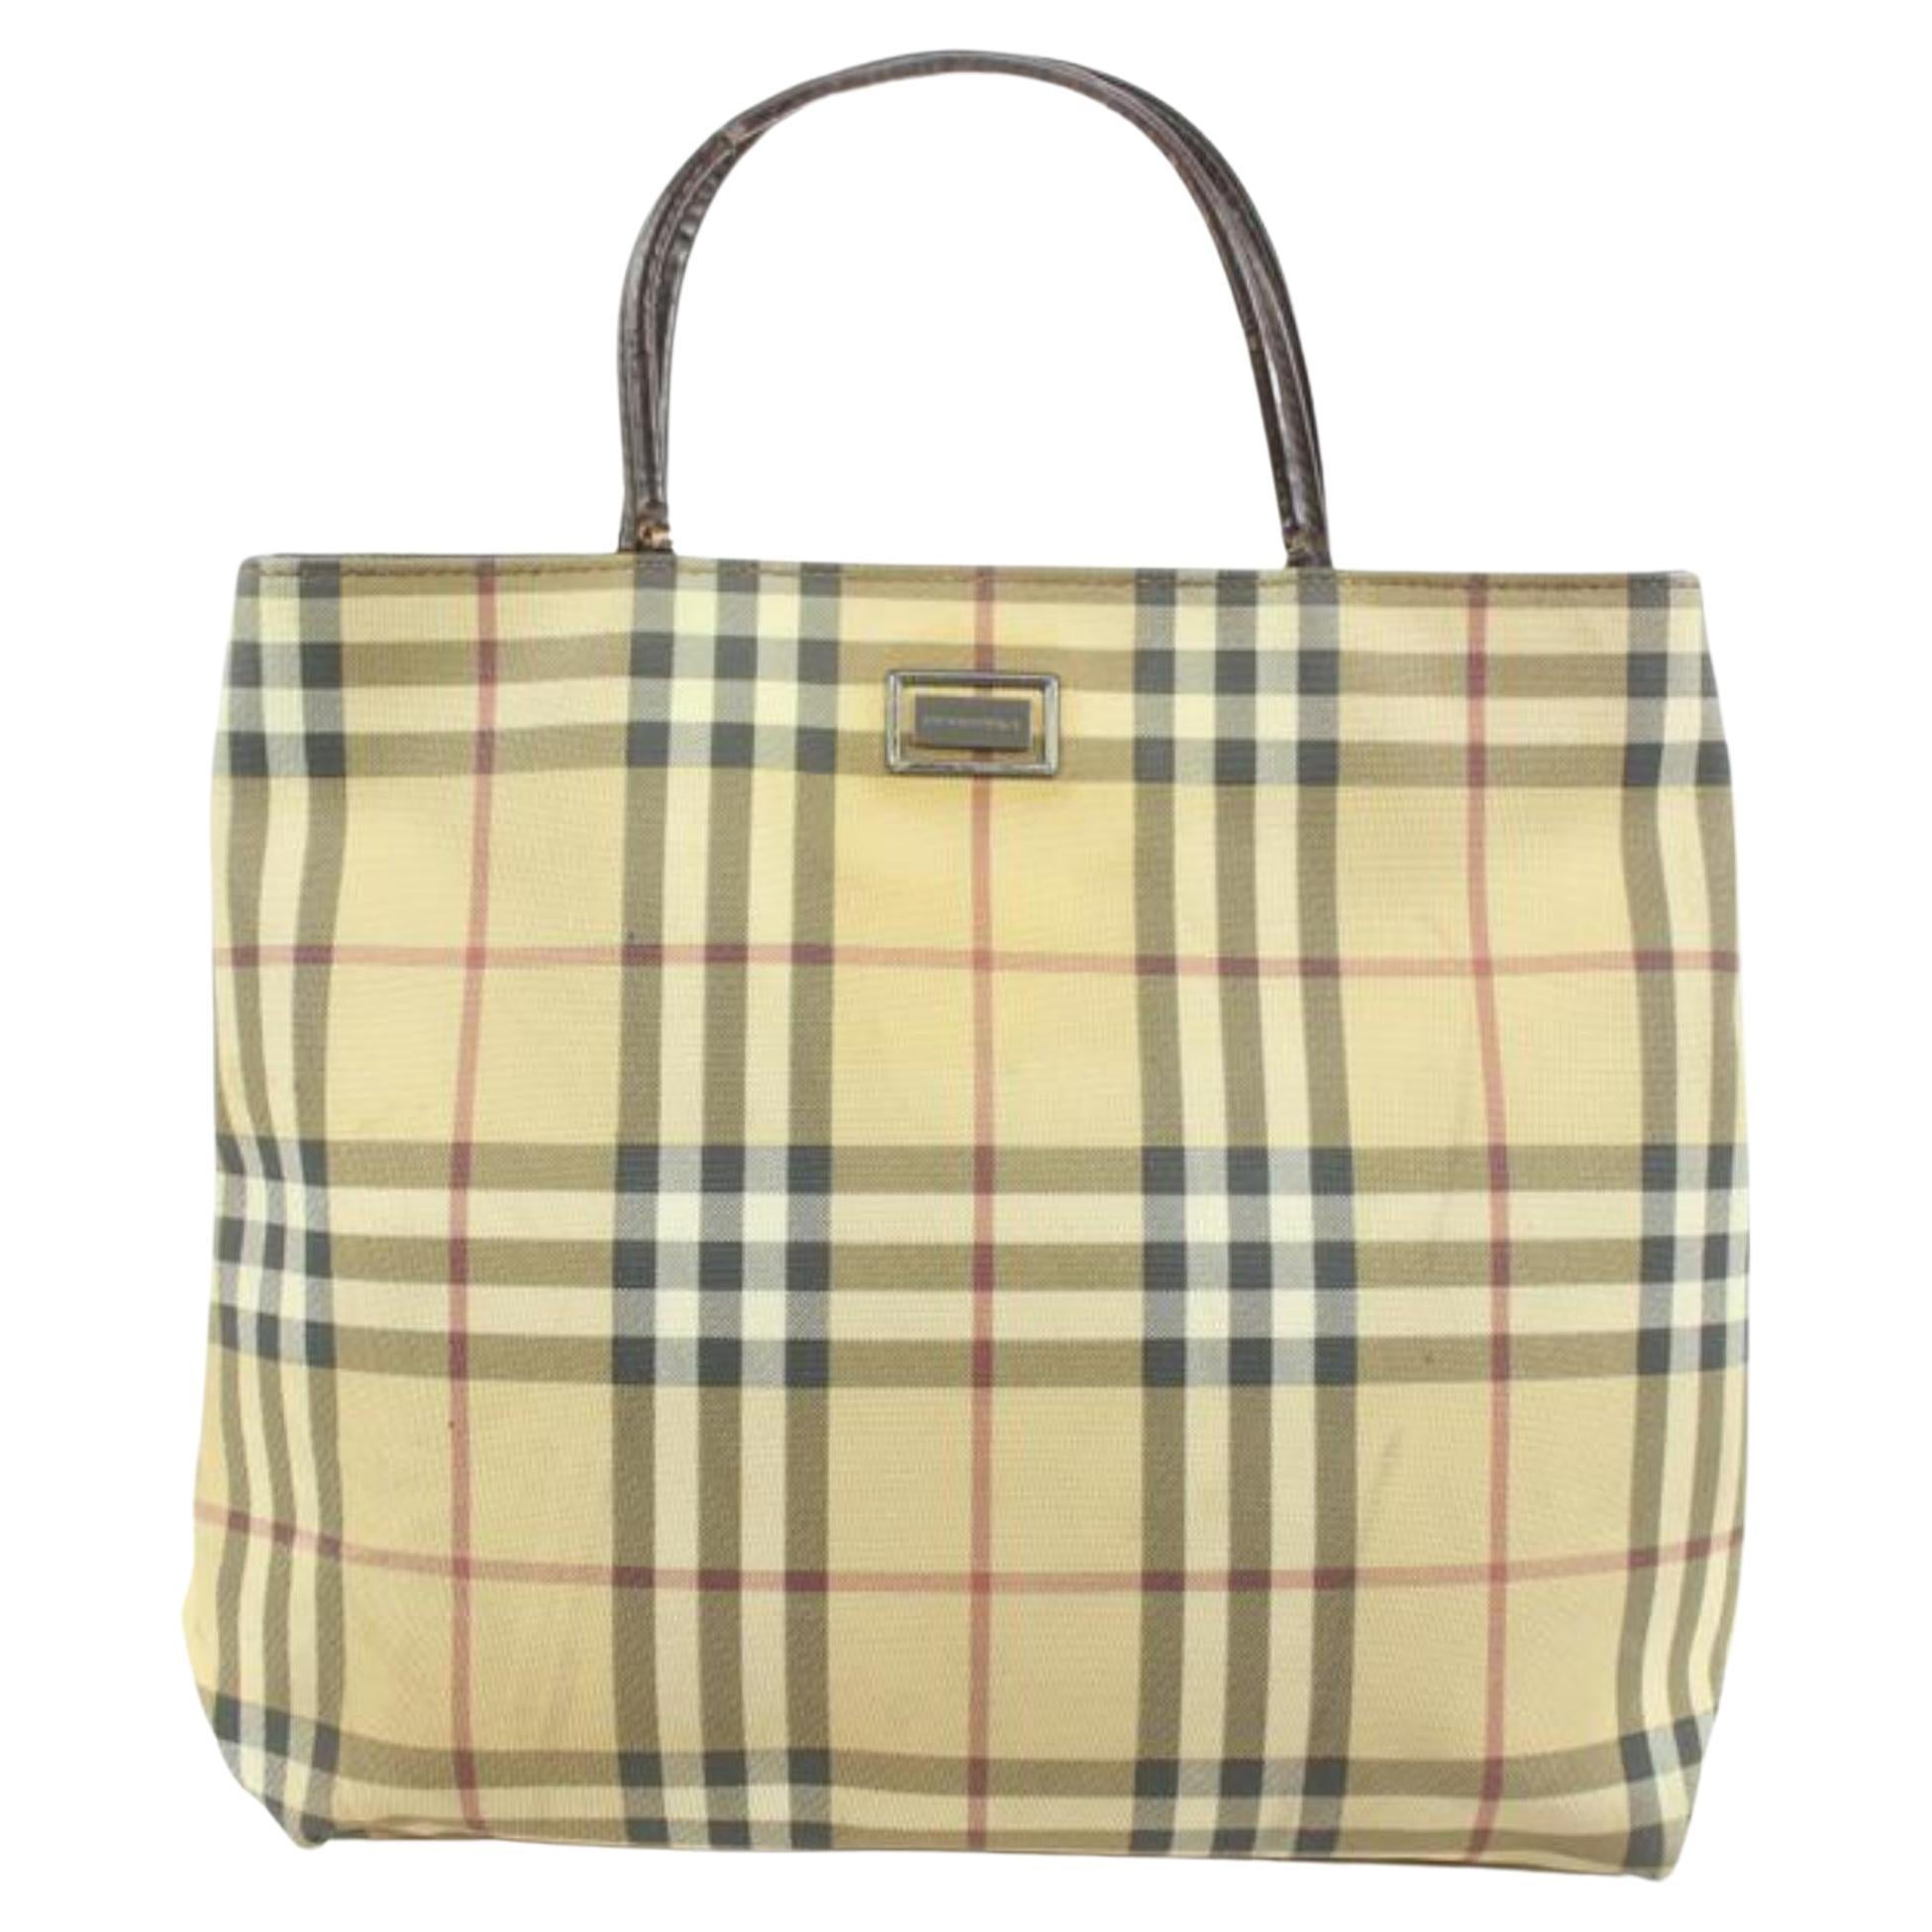 Burberry London Beige Nova Check Coated Canvas Tote Bag Upcycle Ready 9b419s For Sale